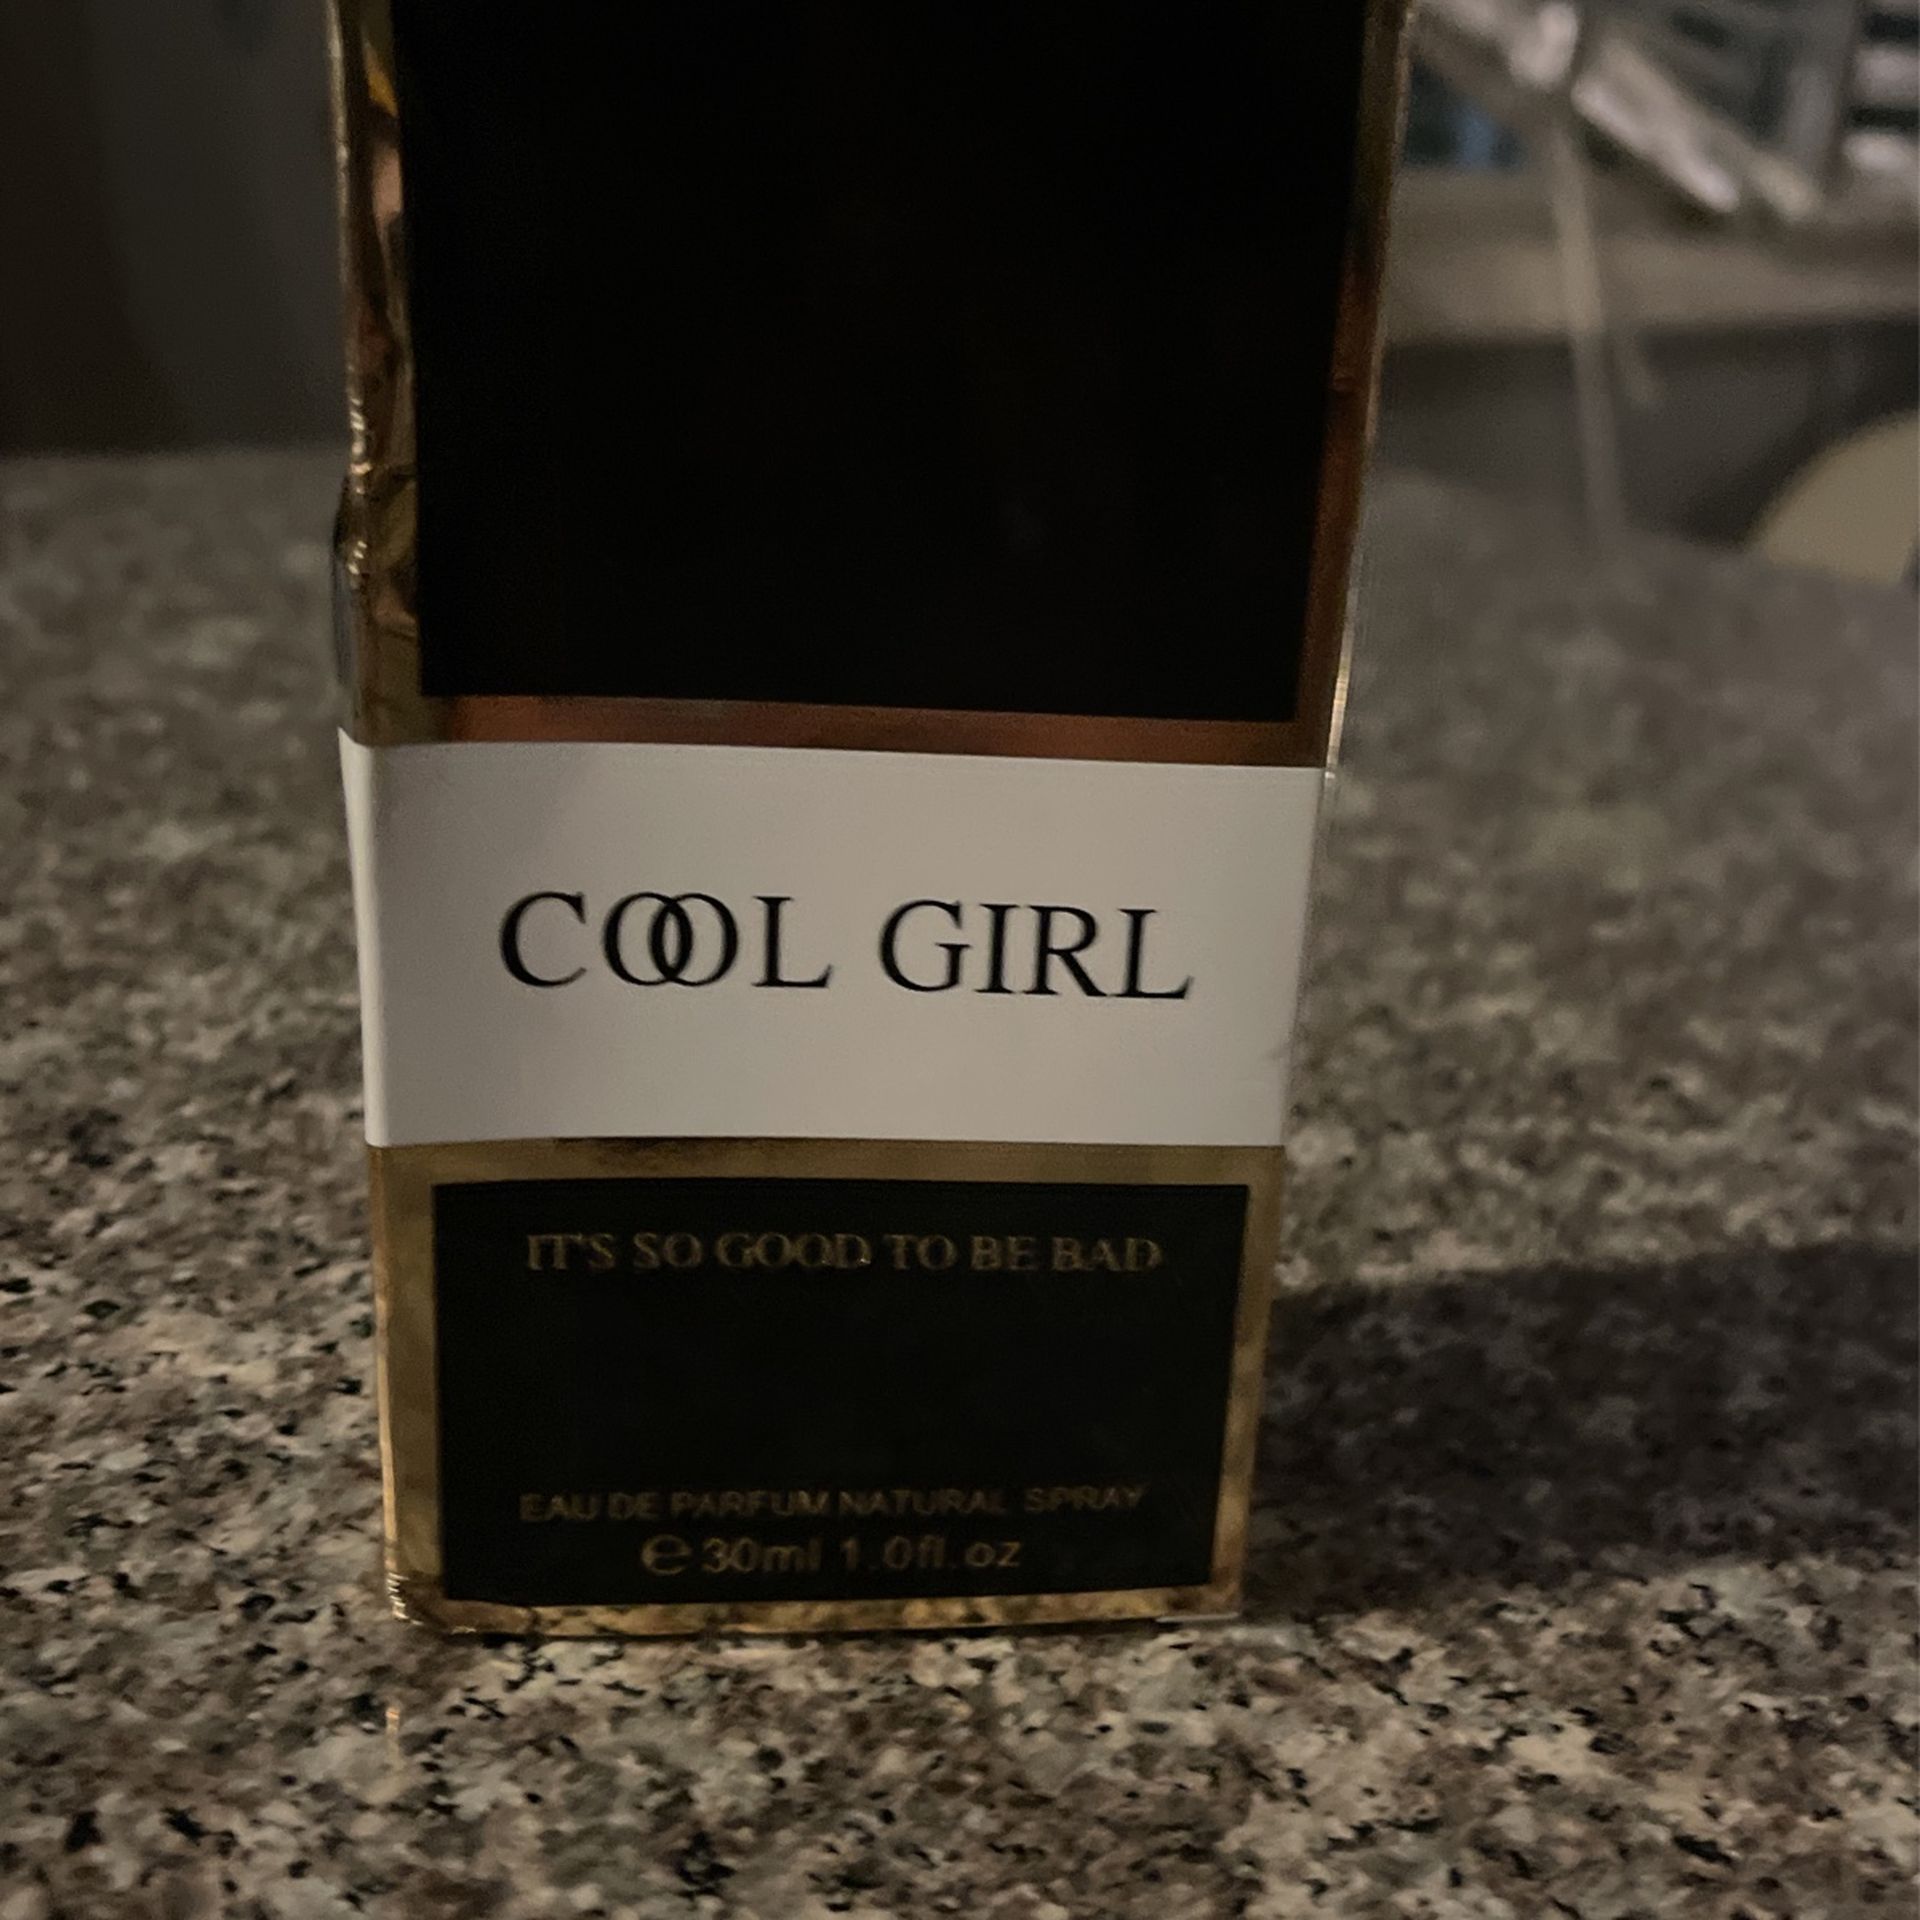 Chanel Gabrielle Essence Perfume for Sale in Rancho Cucamonga, CA - OfferUp